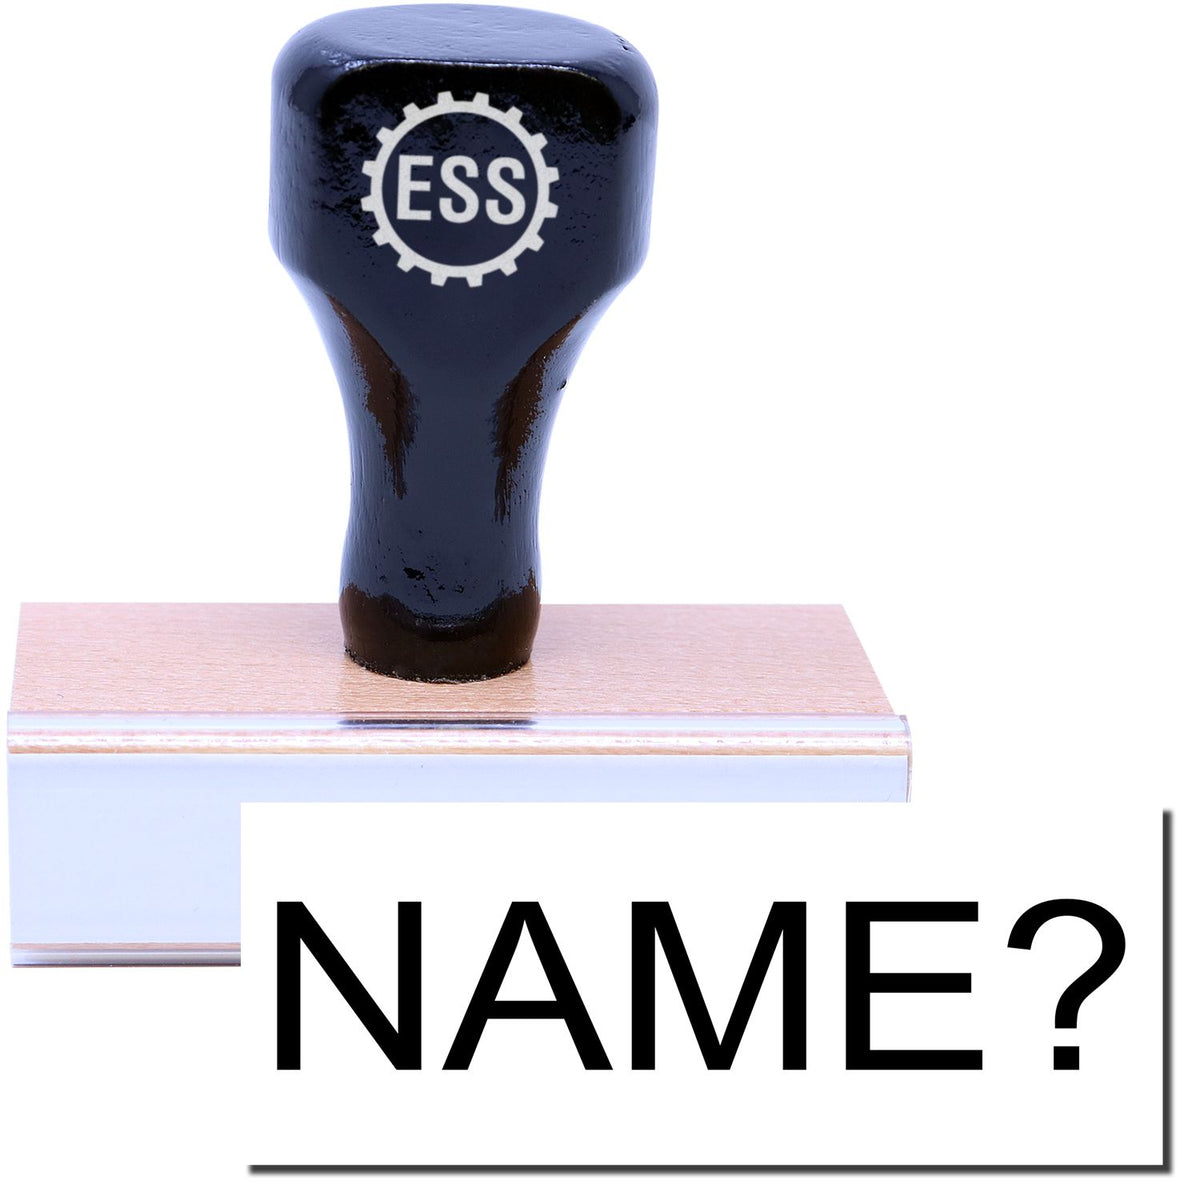 A stock office rubber stamp with a stamped image showing how the text &quot;NAME?&quot; is displayed after stamping.